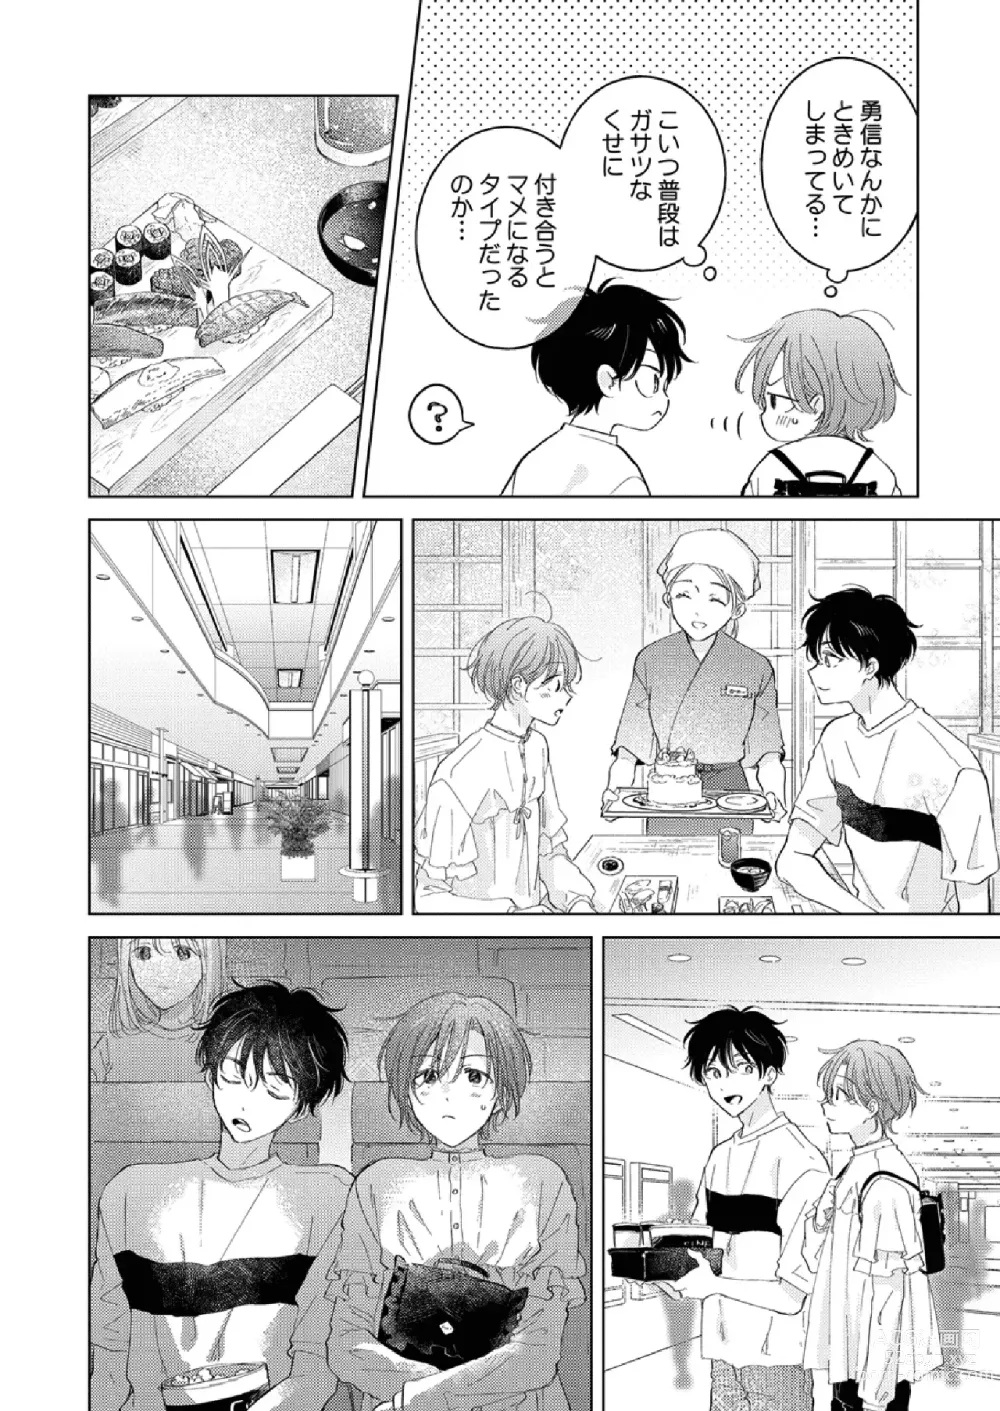 Page 6 of doujinshi How to use Gender-Changing Apps Properly 2